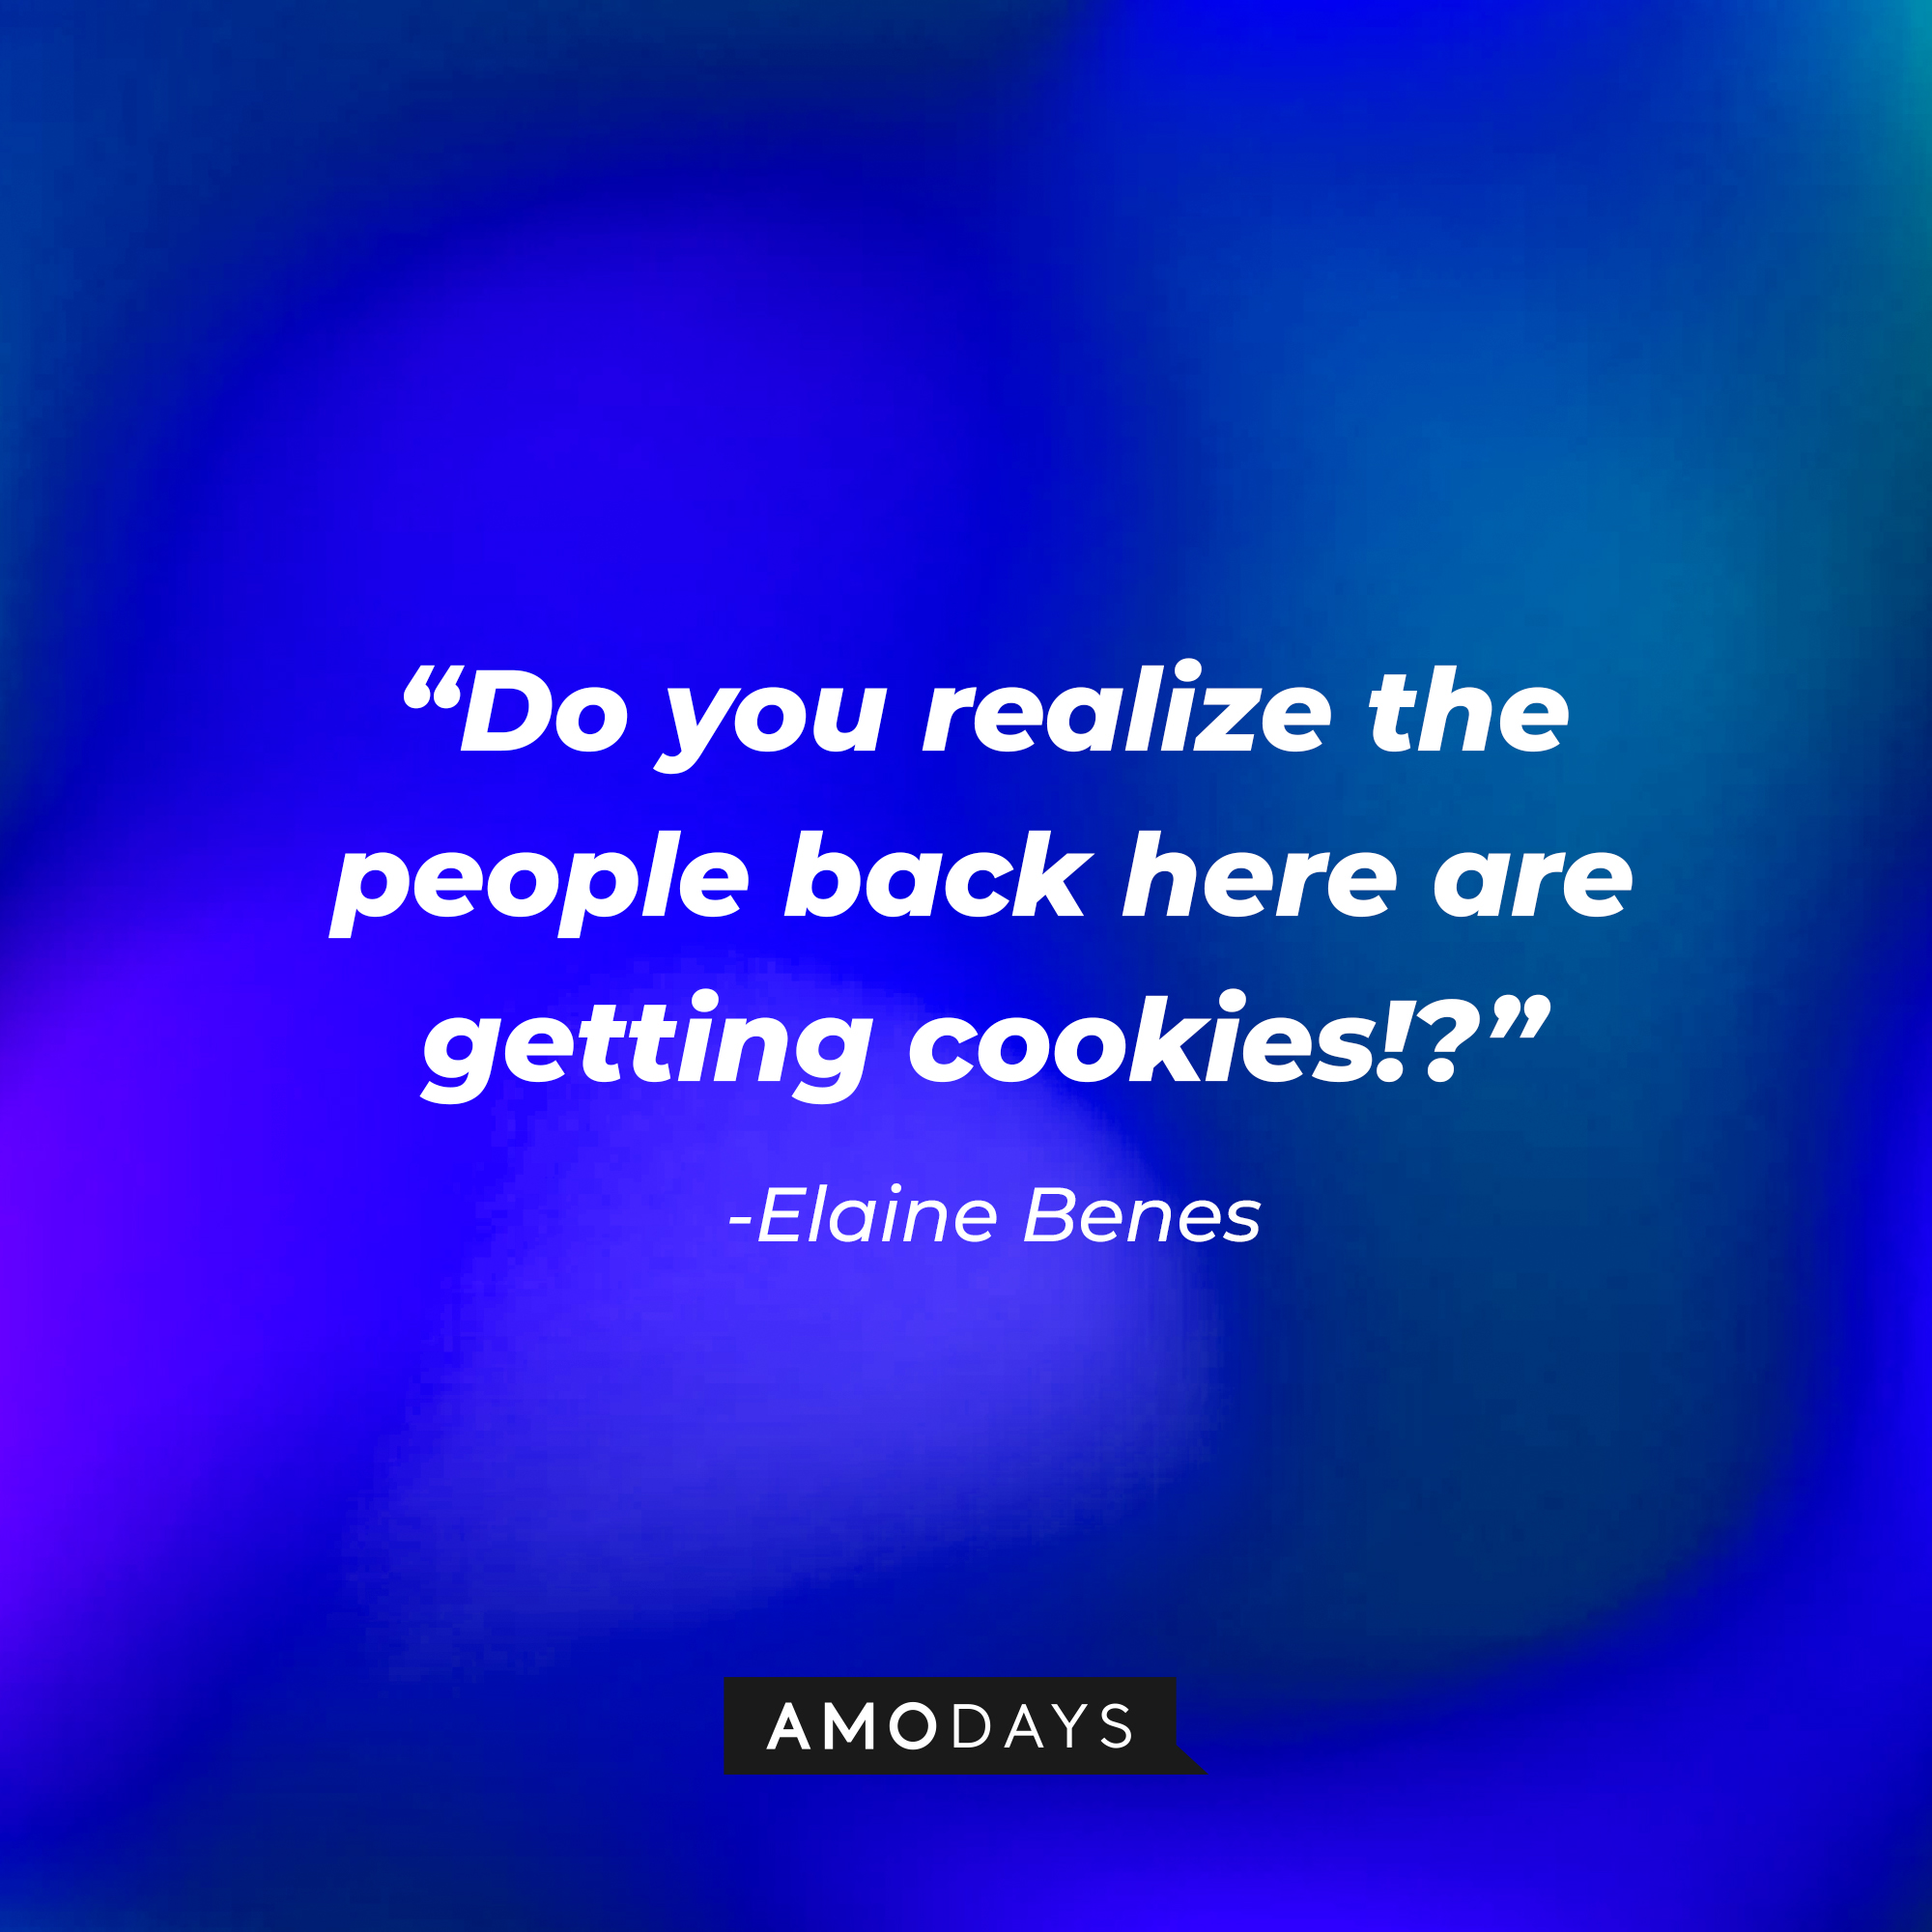 Elaine Benes quote: “Do you realize the people back here are getting cookies!?” | Source: Amodays